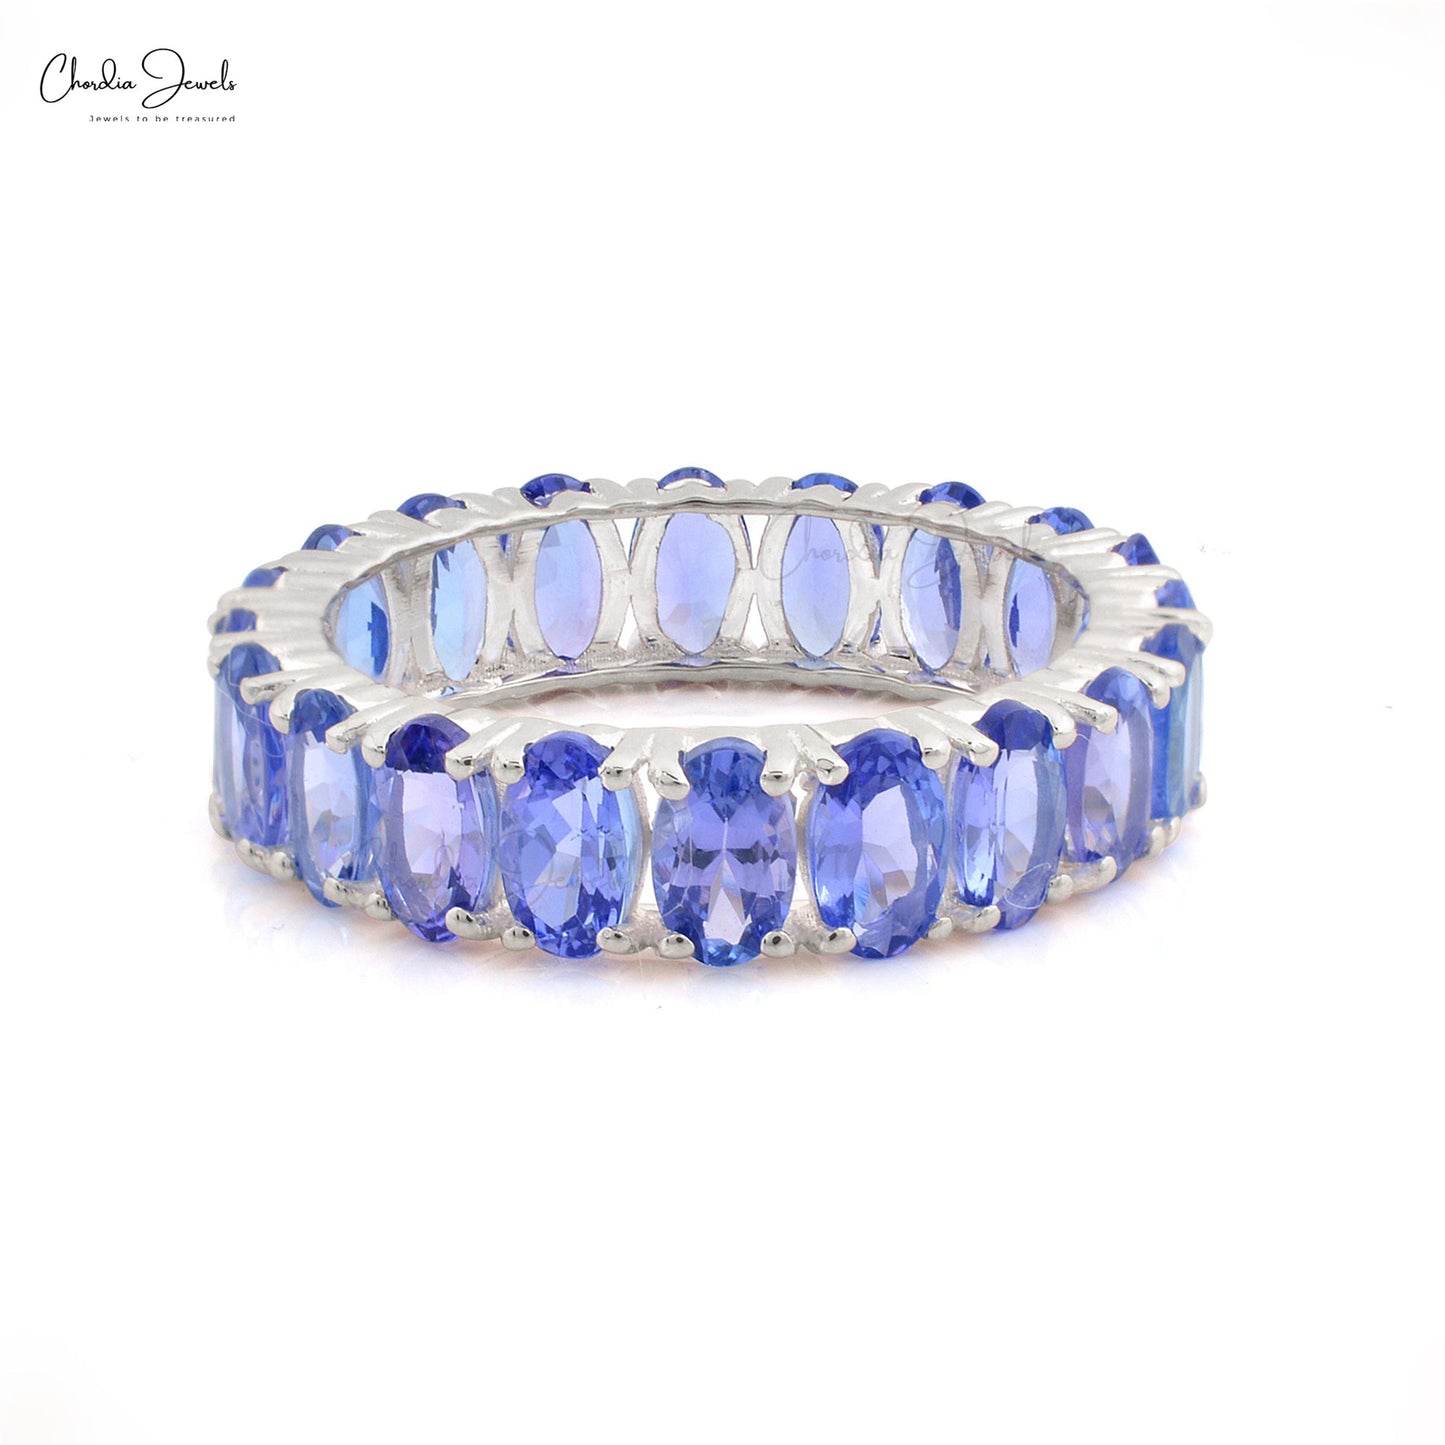 Eternity Ring In 14k Real White Gold Natural Tanzanite Gemstone Handcrafted Ring For Her